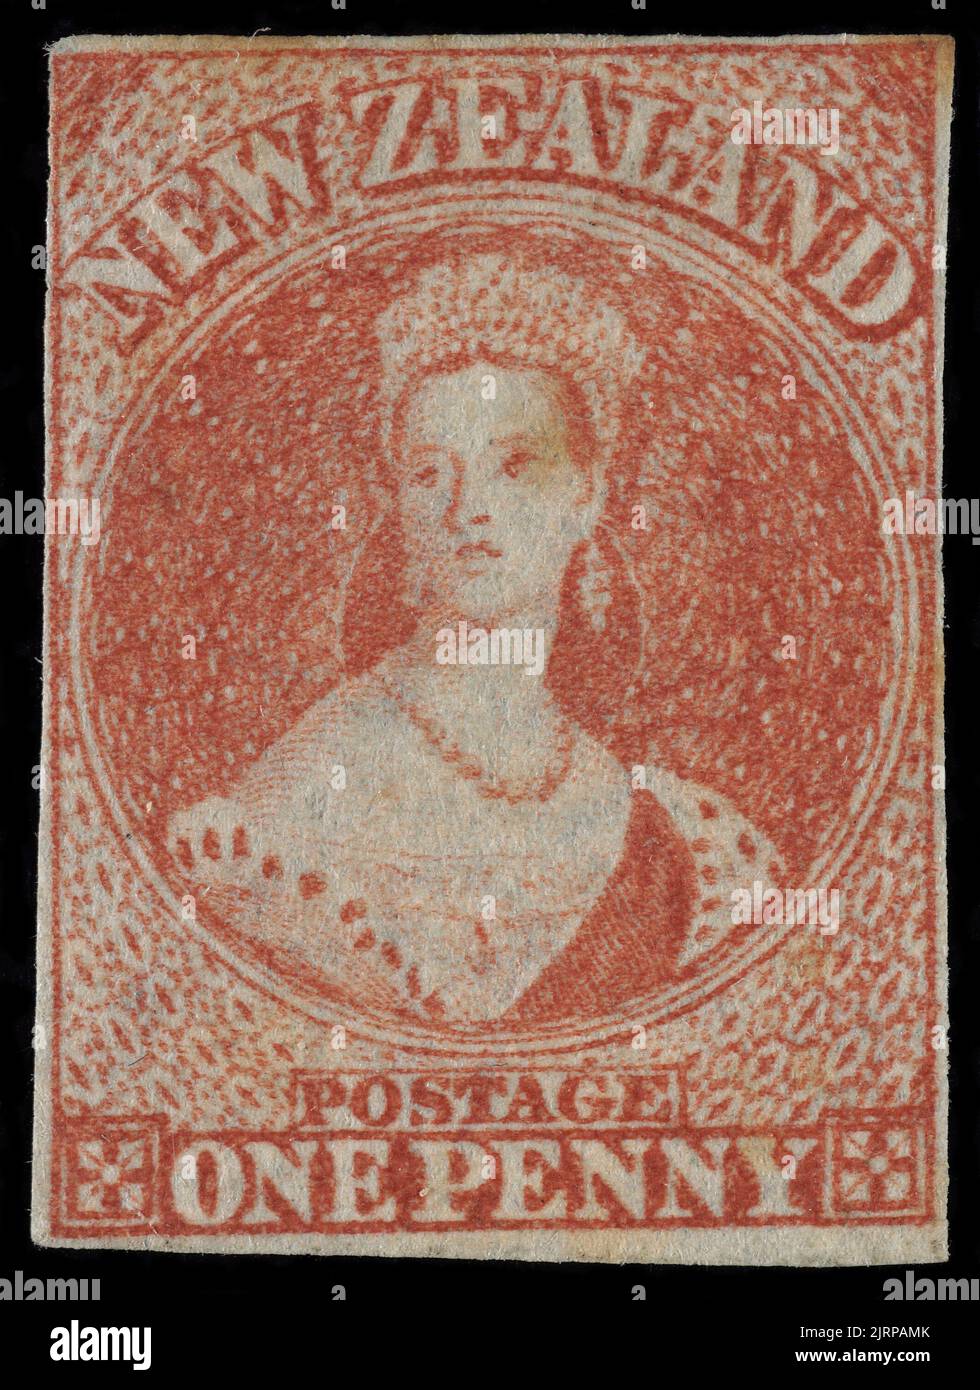 Issued one penny 'Full-Face Queen' [Chalon Head] definitive stamp, 1862, New Zealand, by John Davies, William Humphrys. The New Zealand Post Museum Collection, Gift of New Zealand Post Ltd., 1992. Stock Photo